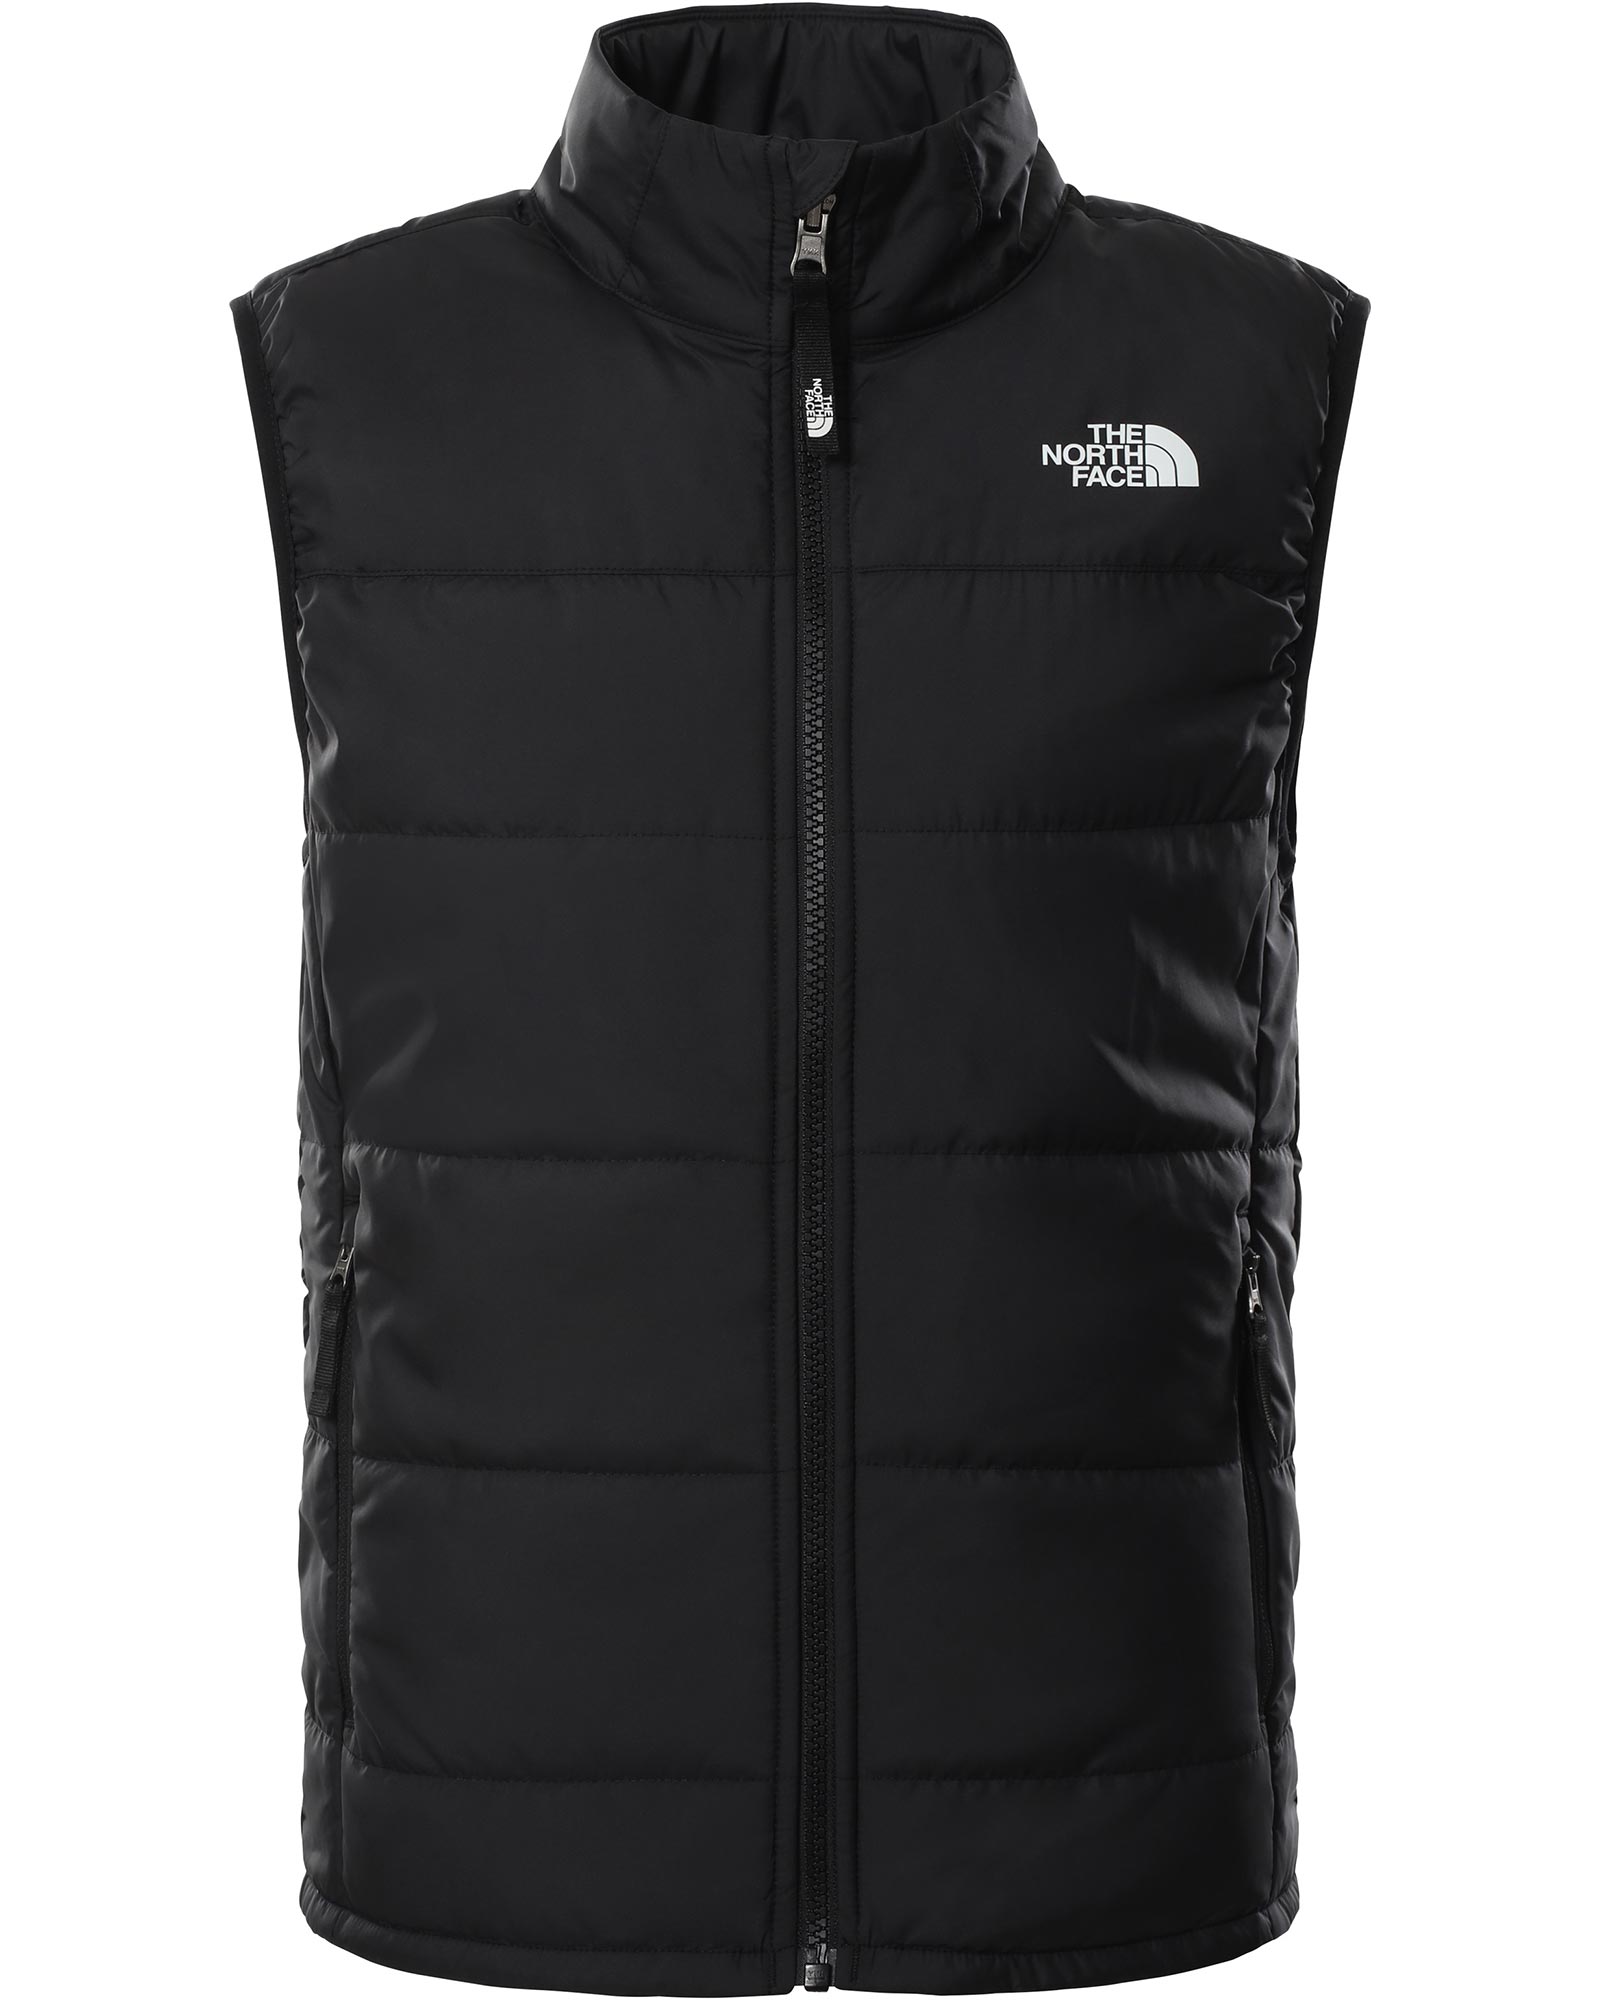 The North Face Reactor Kids' Insulated Vest 408214901LRG 